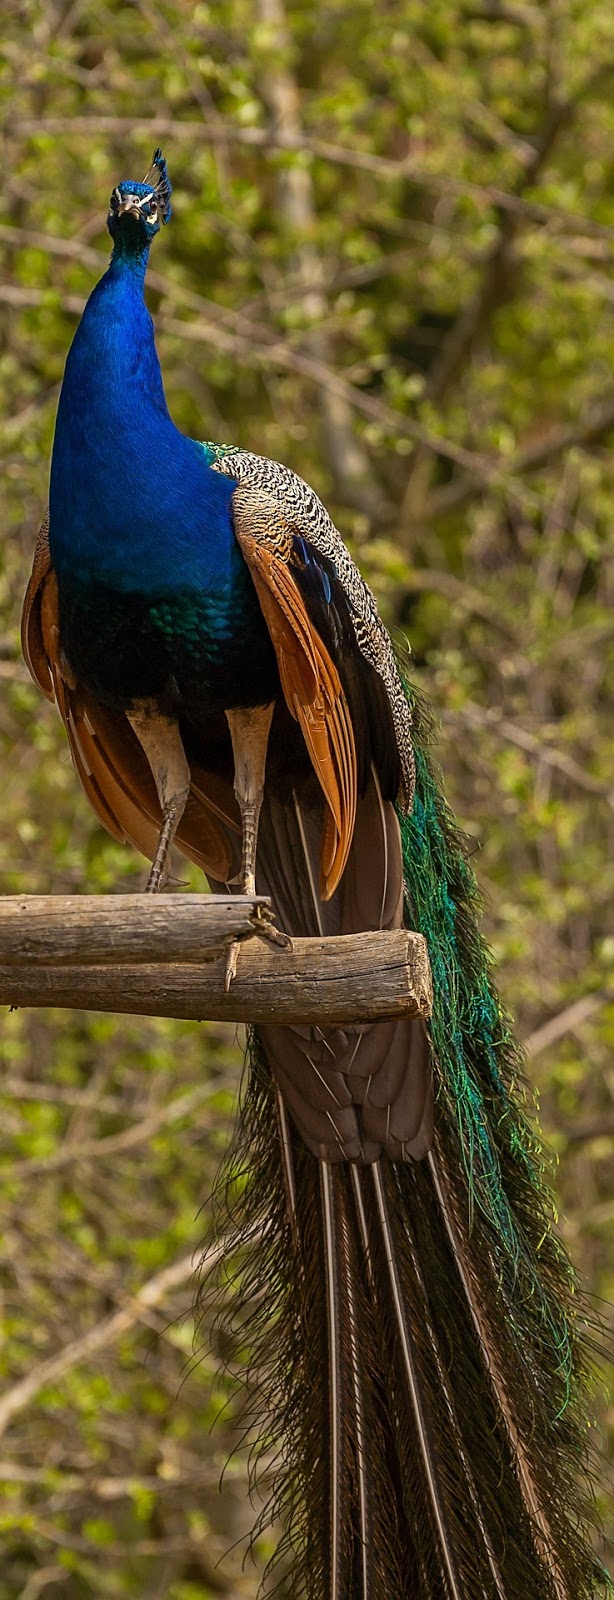 A peacock with it's amazing tail.